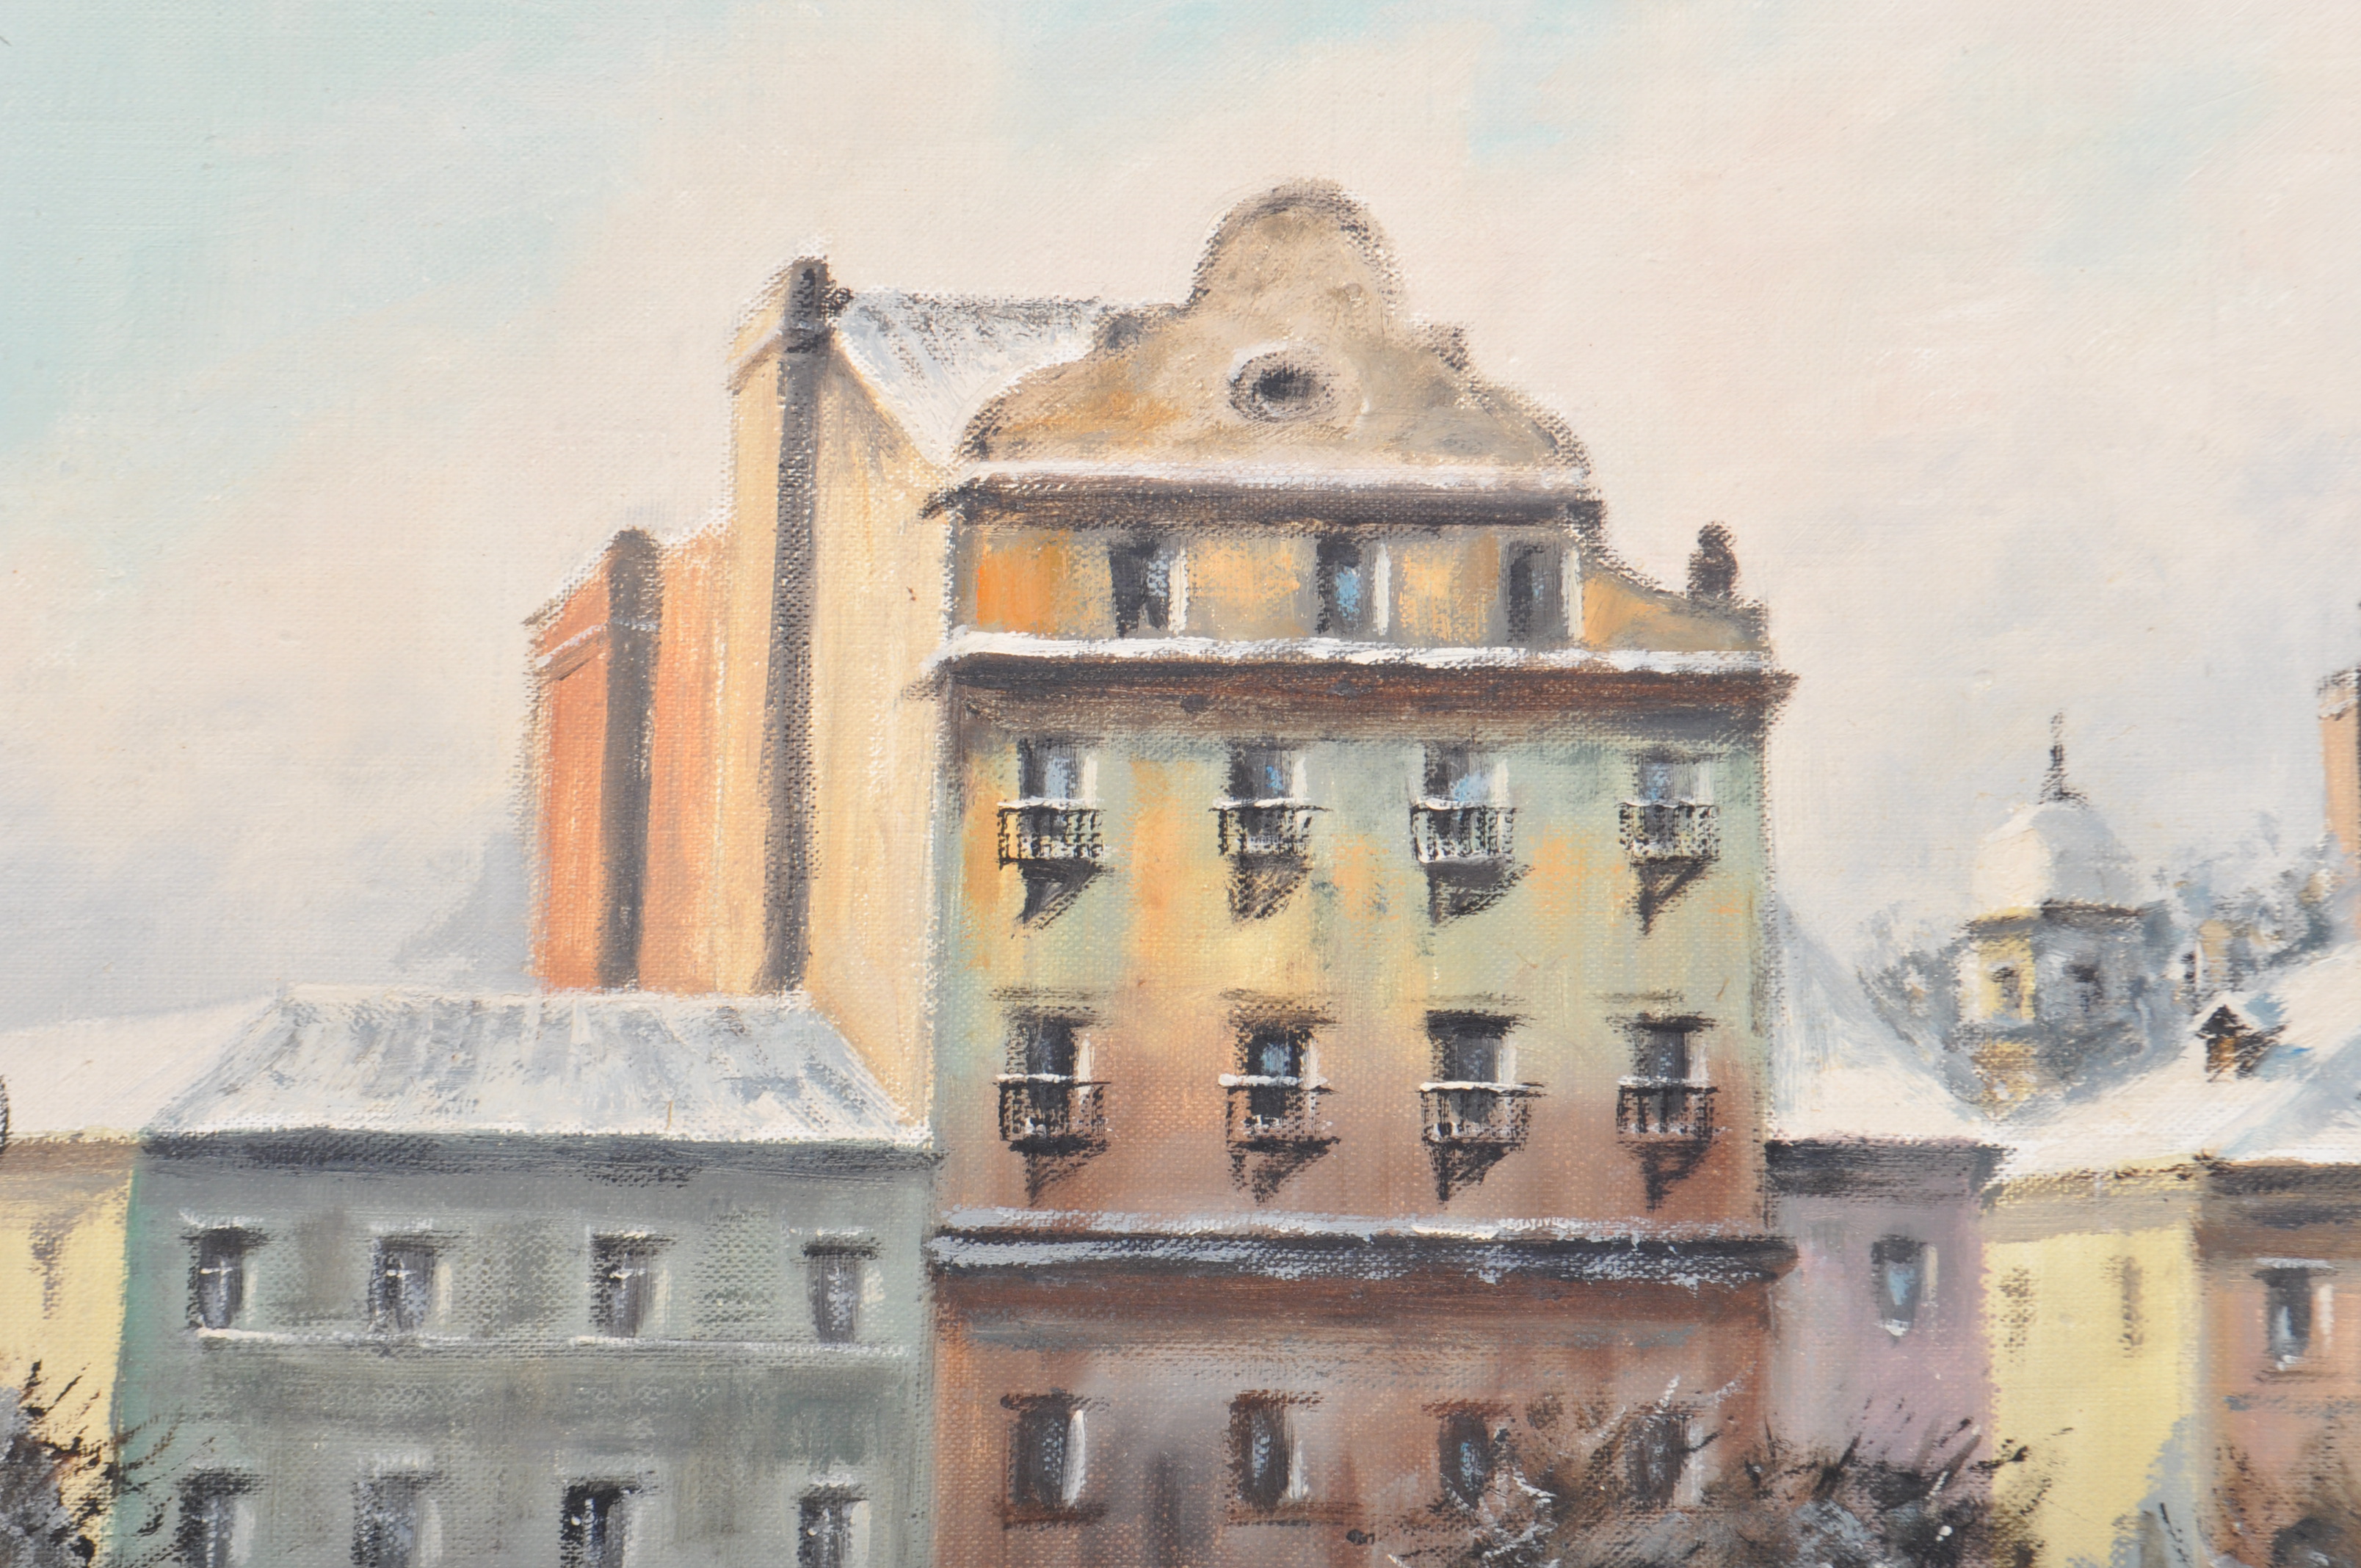 WOLSKY - POLISH SCHOOL OIL ON CANVAS WARSAW SCENE PAINTING - Image 3 of 7